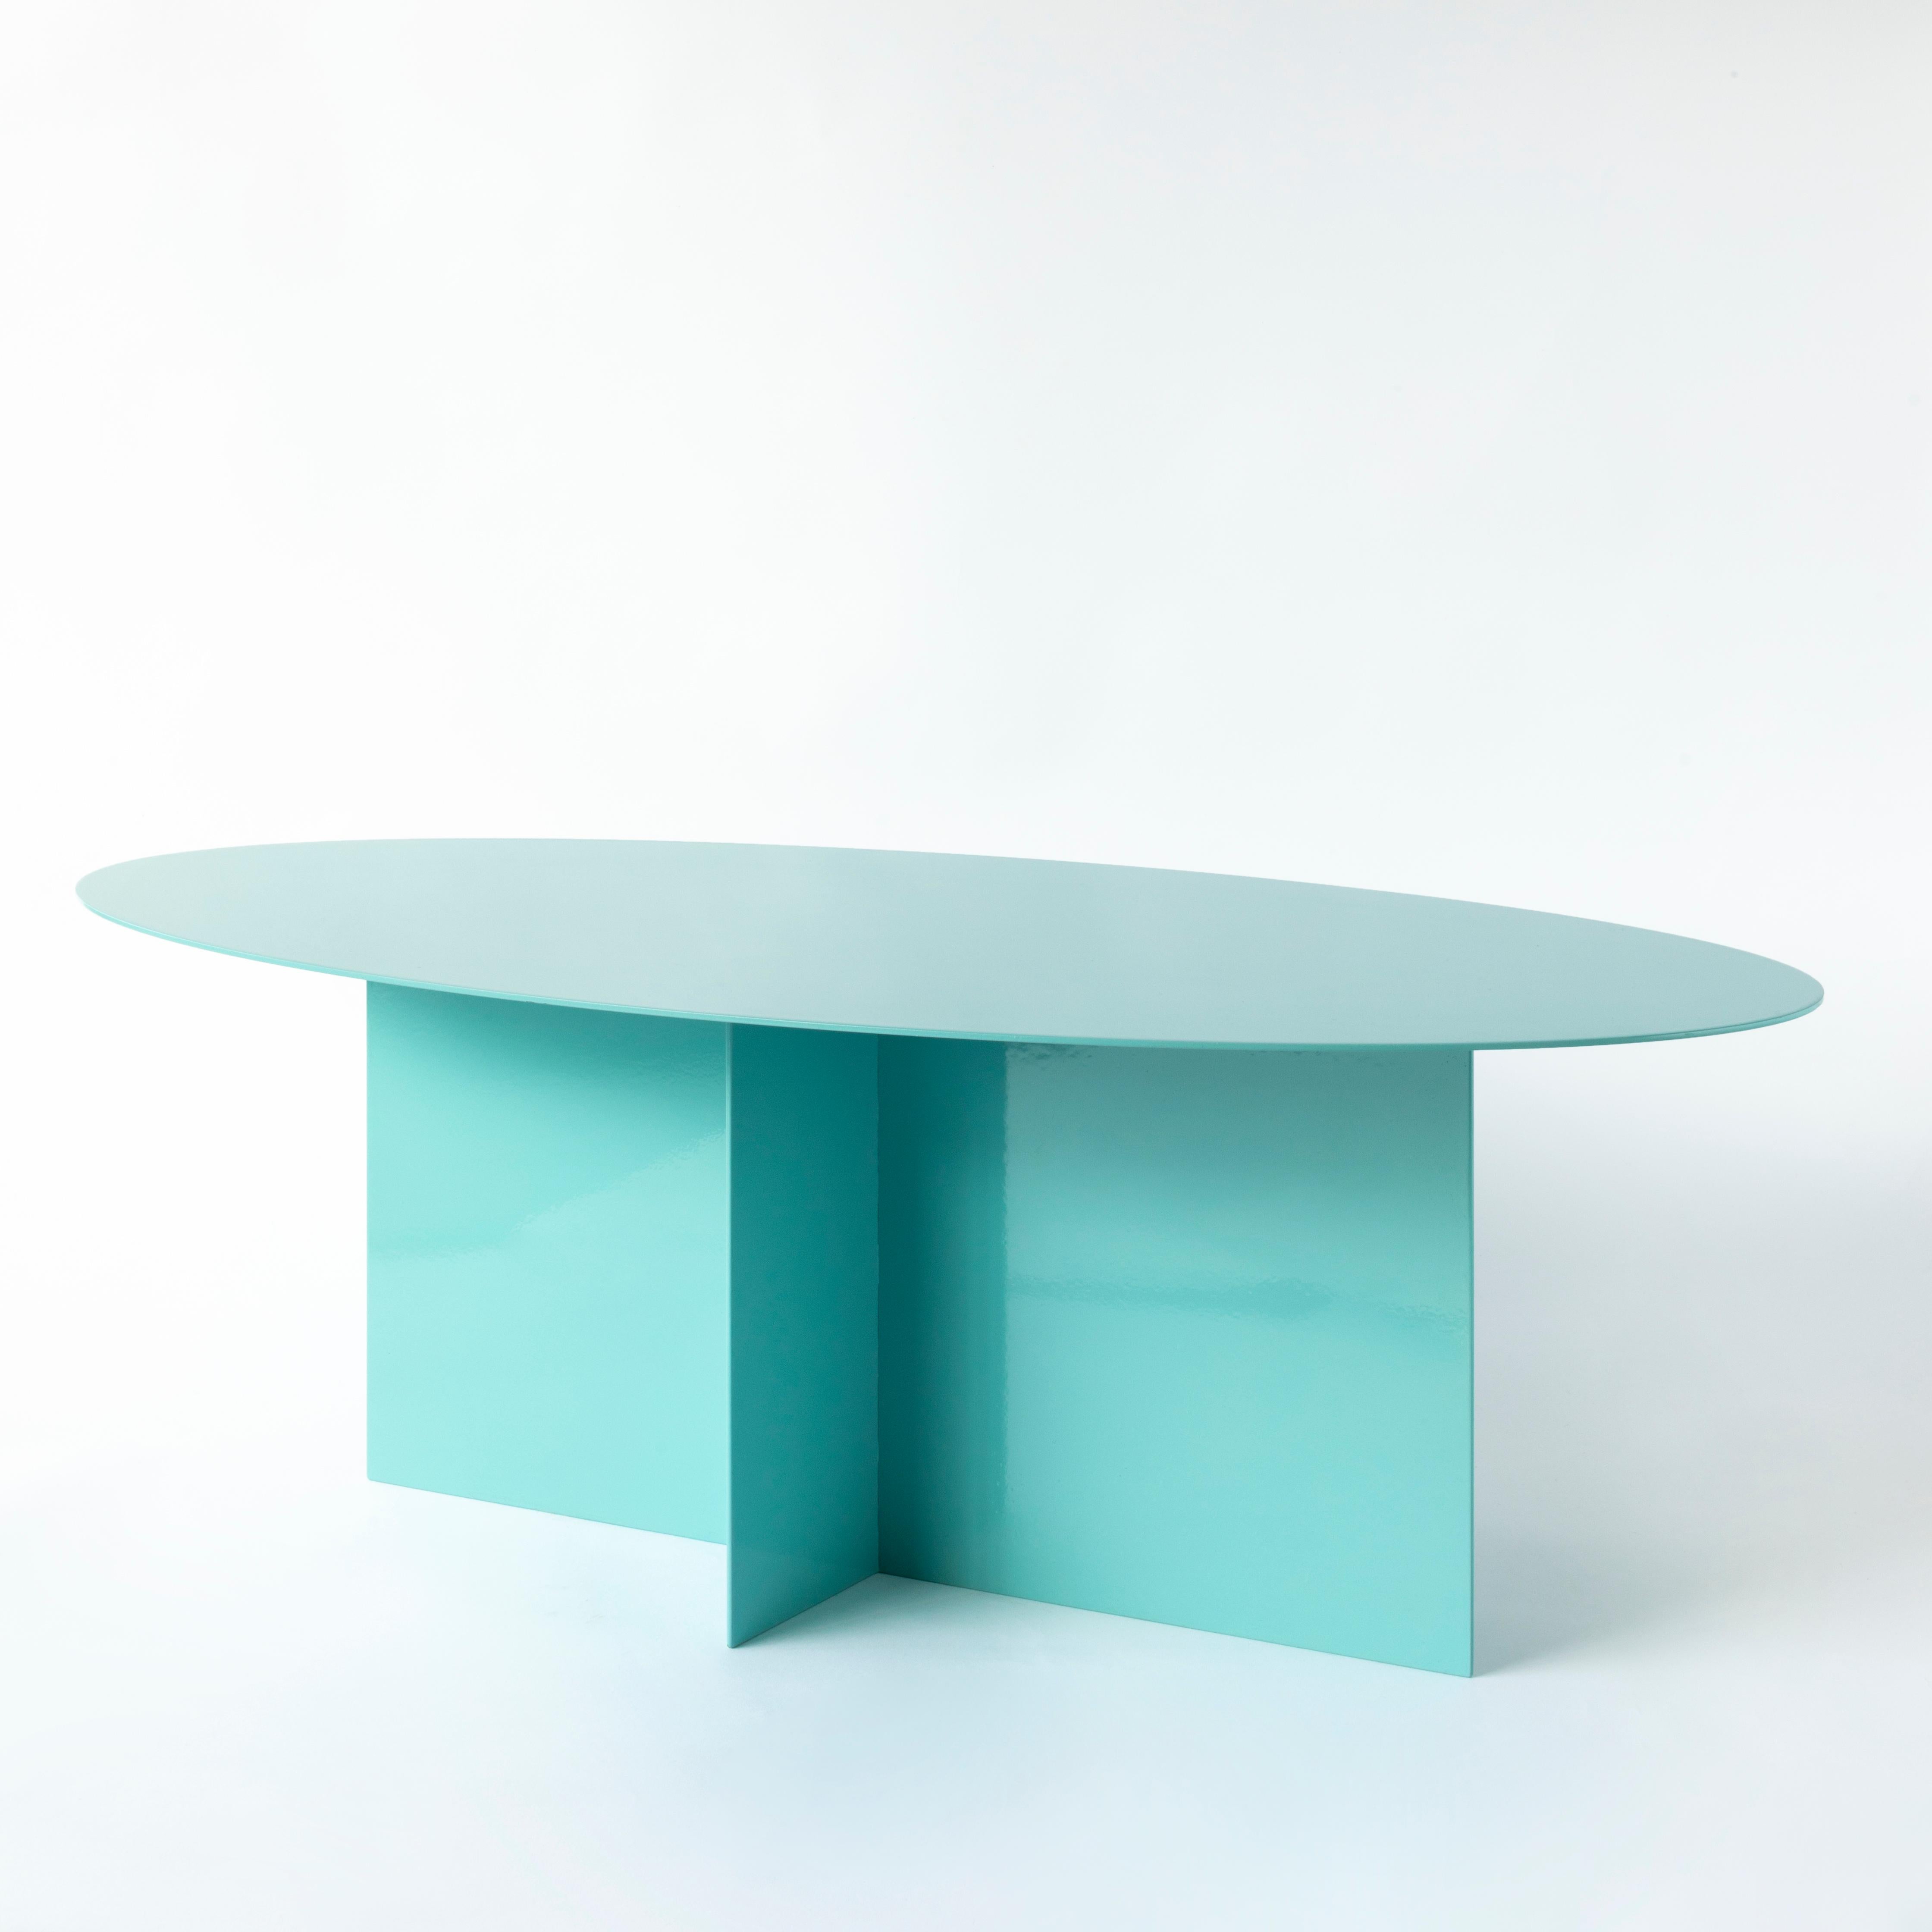 Across Oval Light Blue Coffee Table by Secondome Edizioni
Designer: Claudia Pignatale.
Dimensions: D 45 x W 90 x H 37 cm.
Materials: Iron.

Collection / Production: Secondome. This piece can be customized. Available finishes: any RAL color. Please